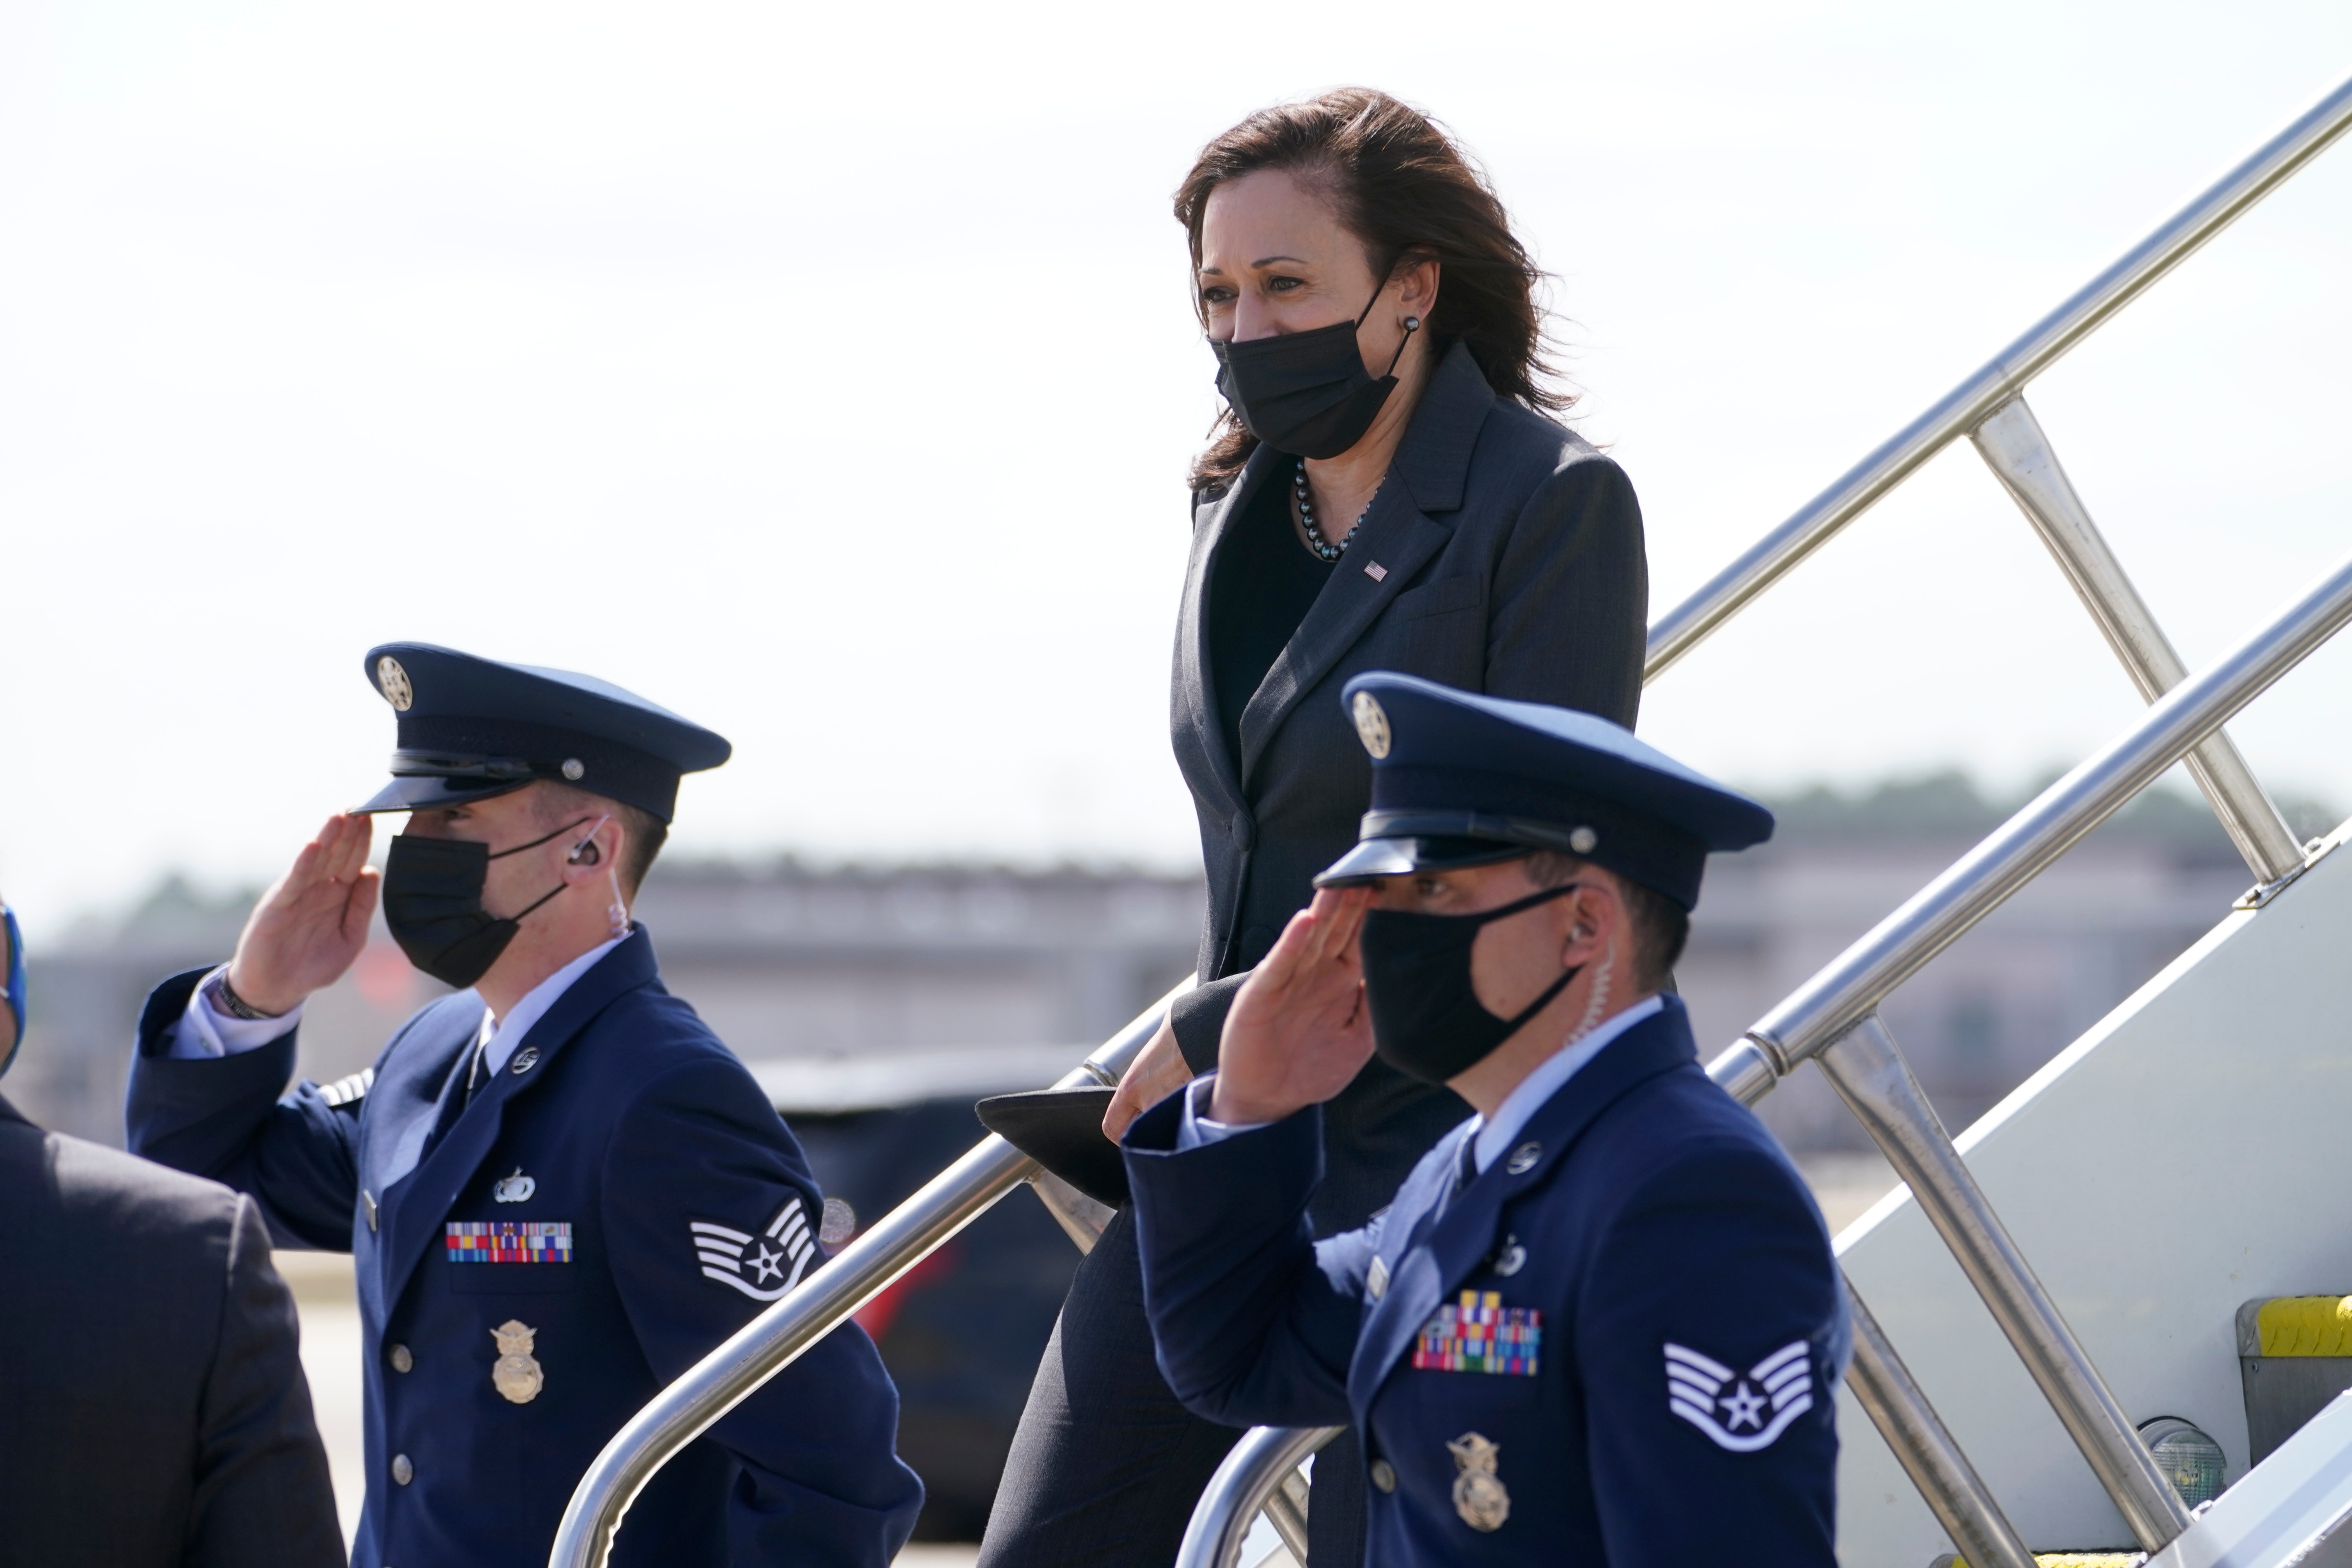 VP Harris repeatedly fails to salute Air Force Two military personnel, breaking with precedent